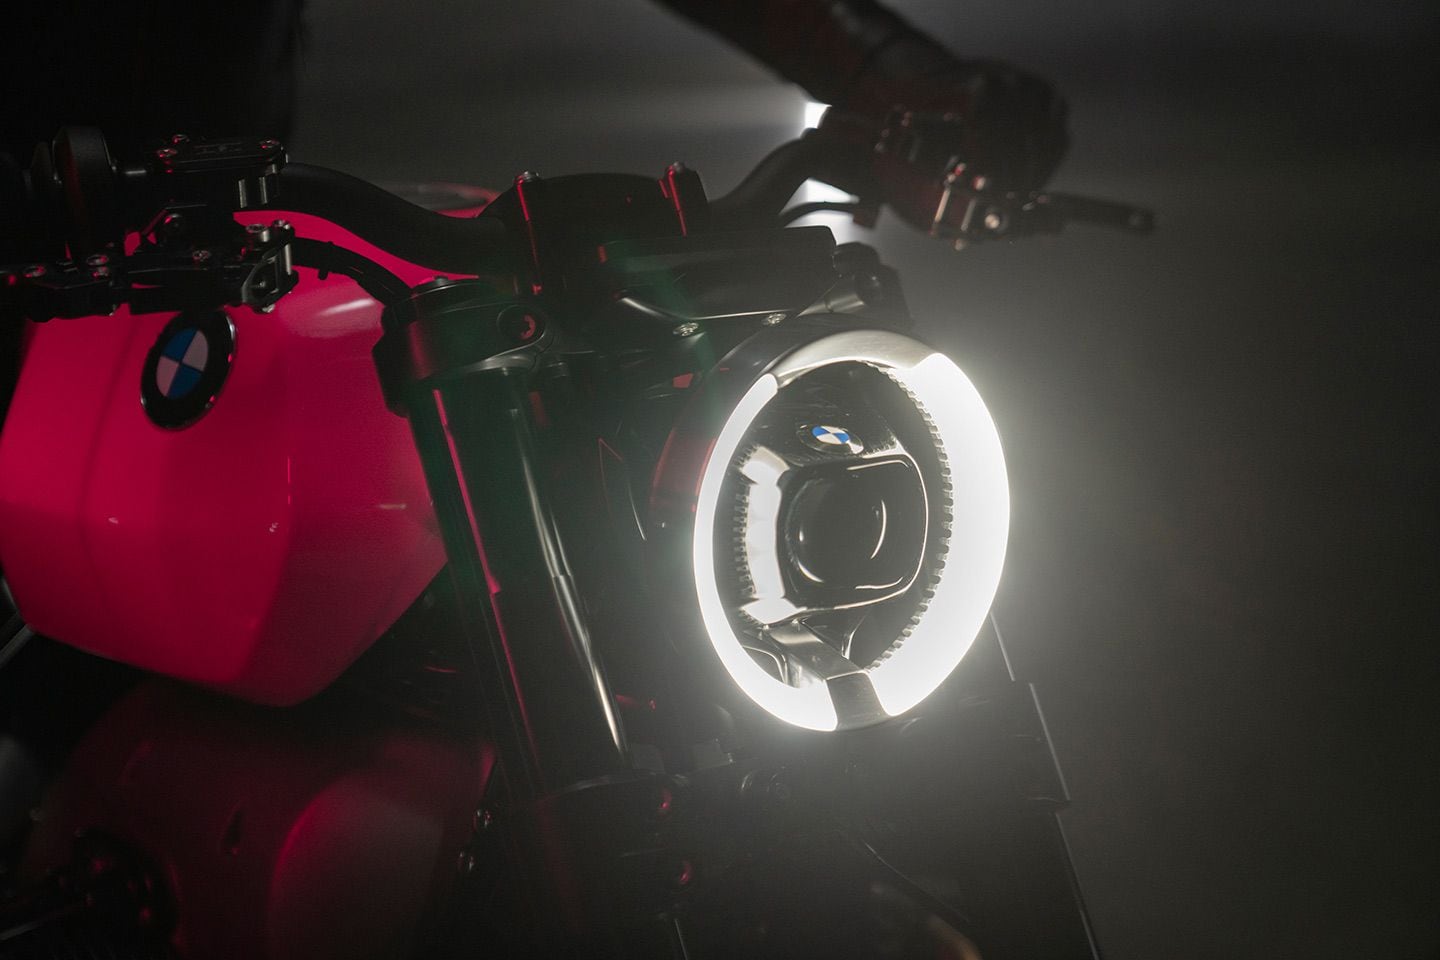 The R 20 headlight has driving lights around the outside with an LED inside.